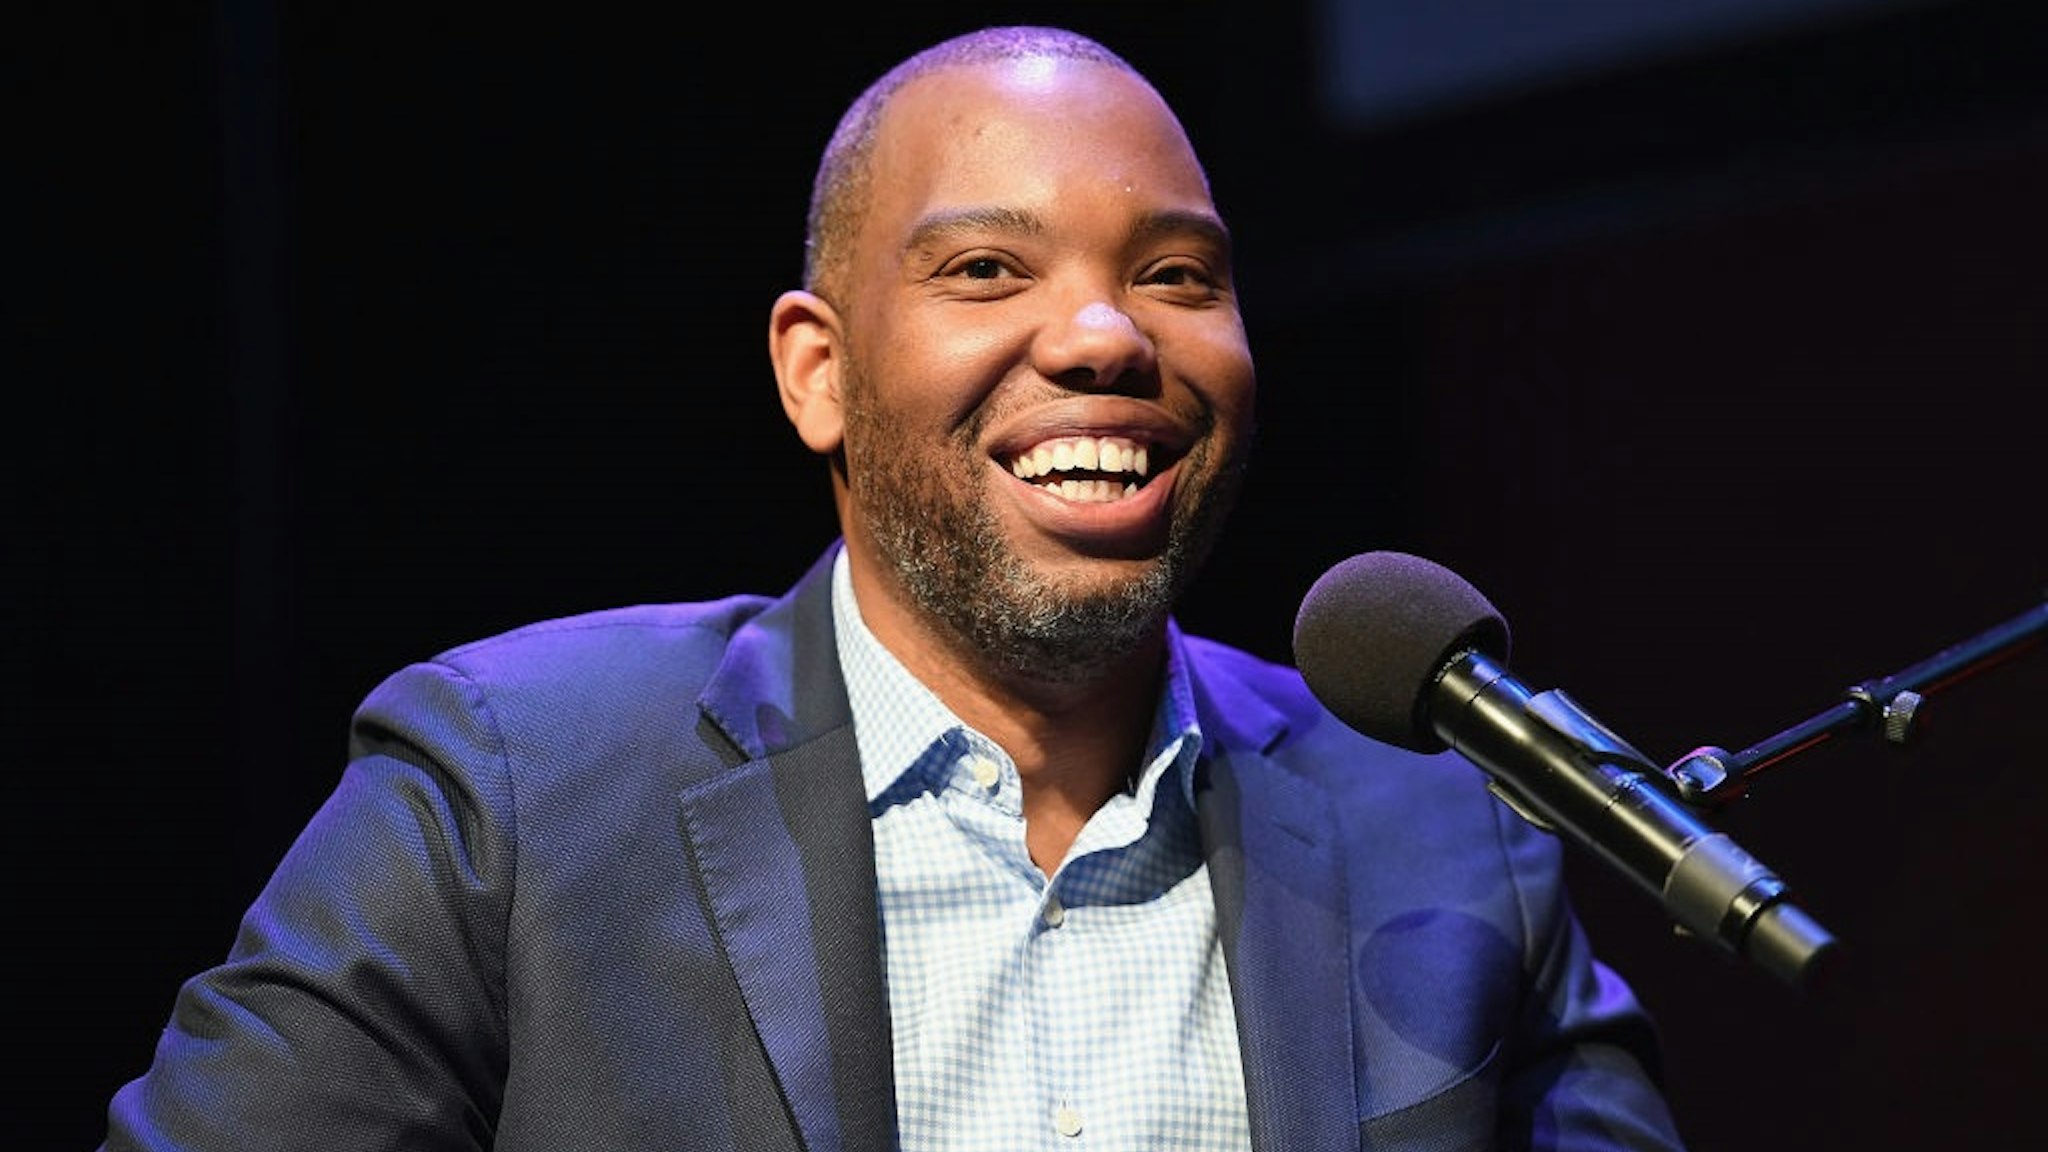 NEW YORK, NY - FEBRUARY 27: Author Ta-Nehisi Coates attends a panel at The Apollo Theater on February 27, 2018 in New York City.